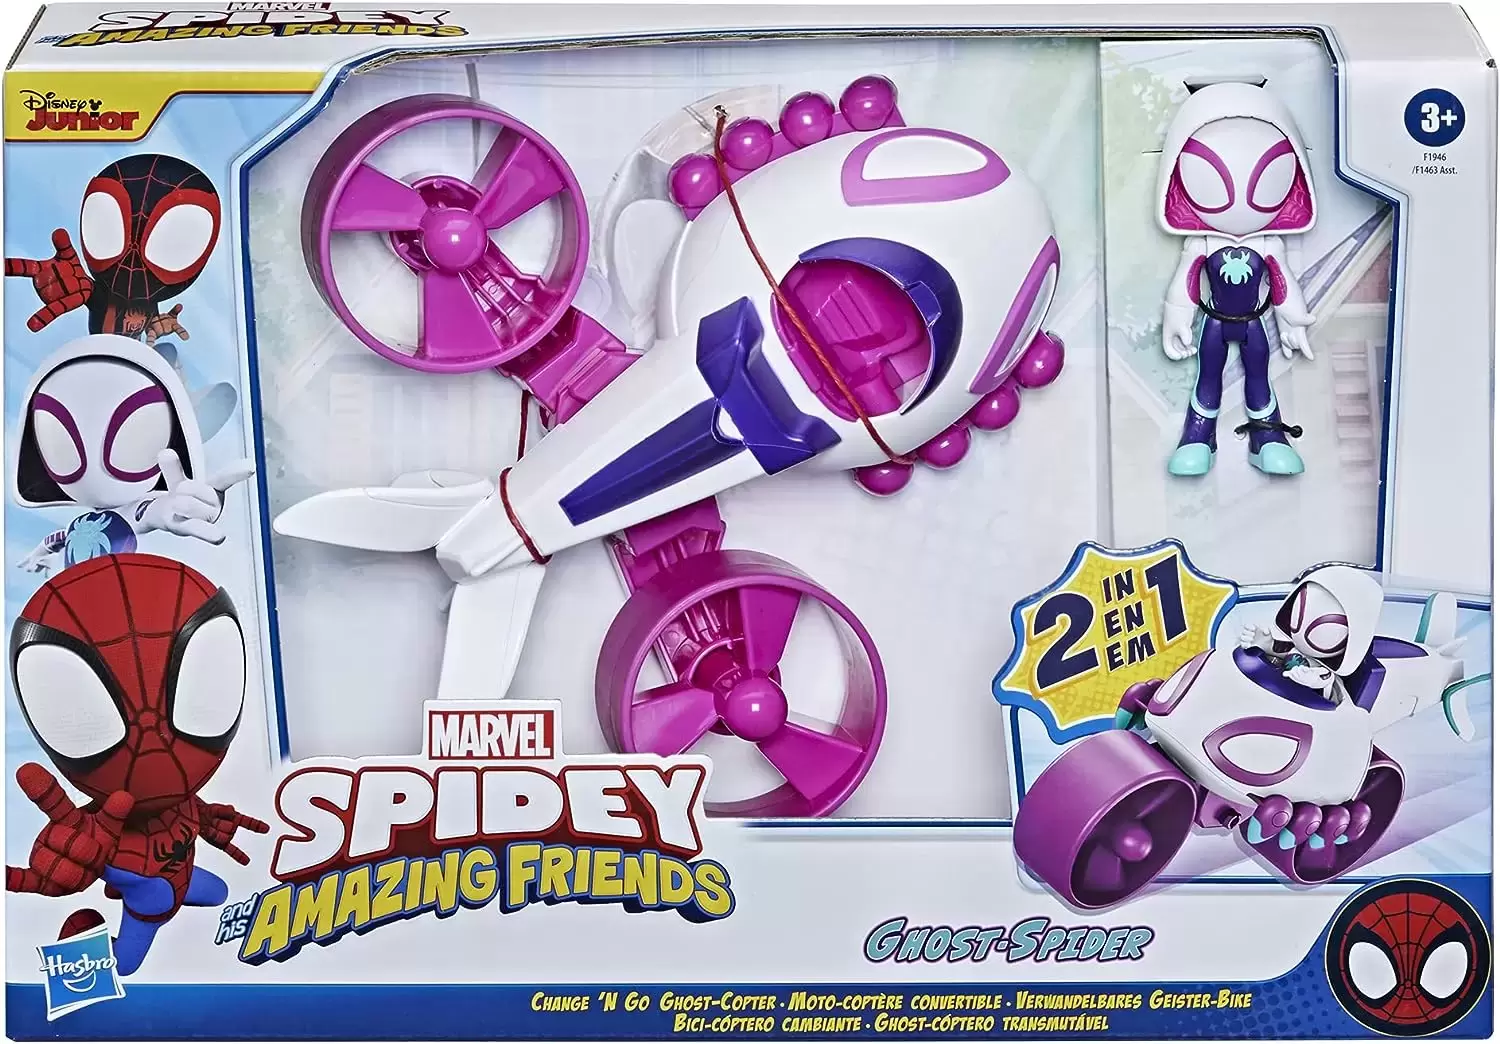 Spidey And His Amazing Friends - Change \'N Go Ghost-Copter